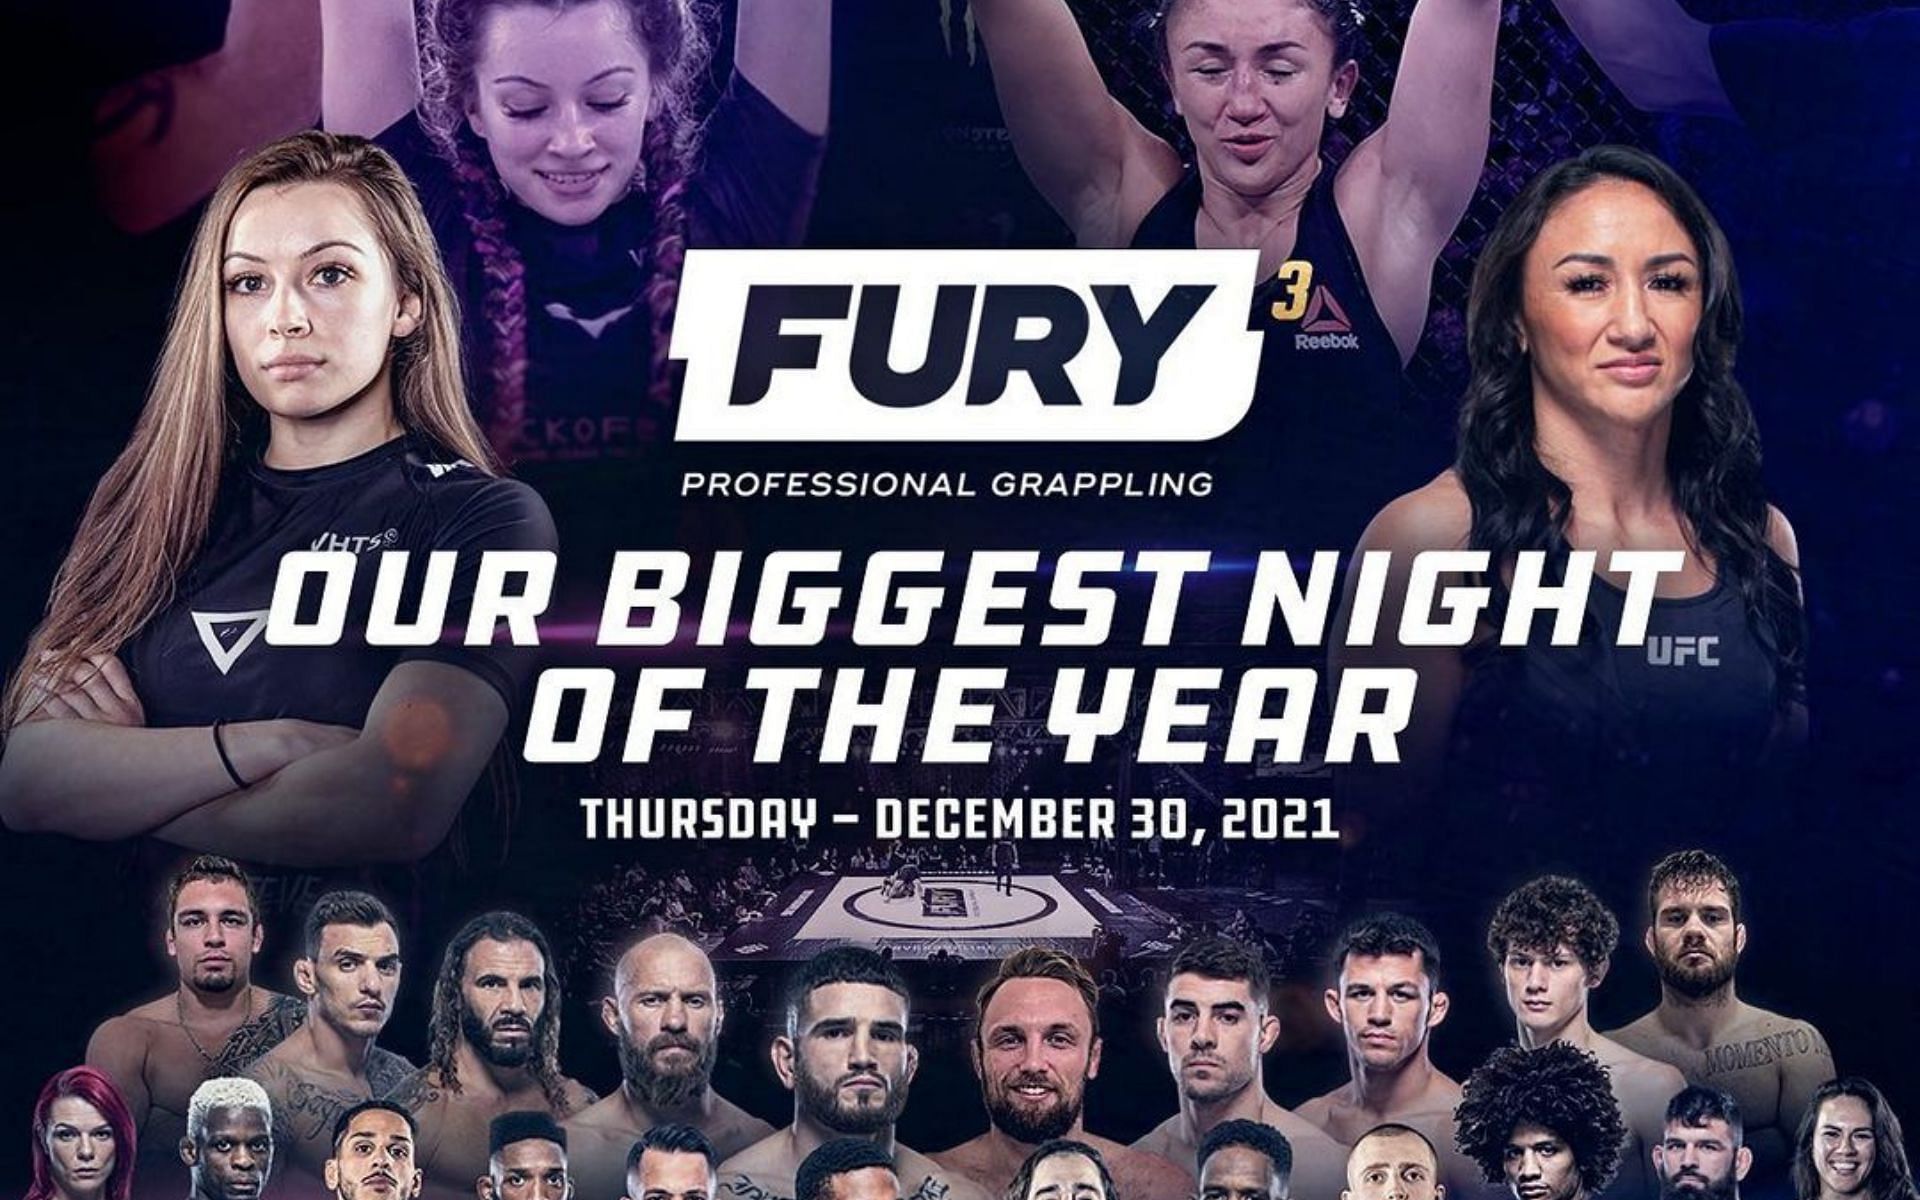 Fury Pro 3 will be a star-studded event [Image credits: @furygrappling on Instagram]